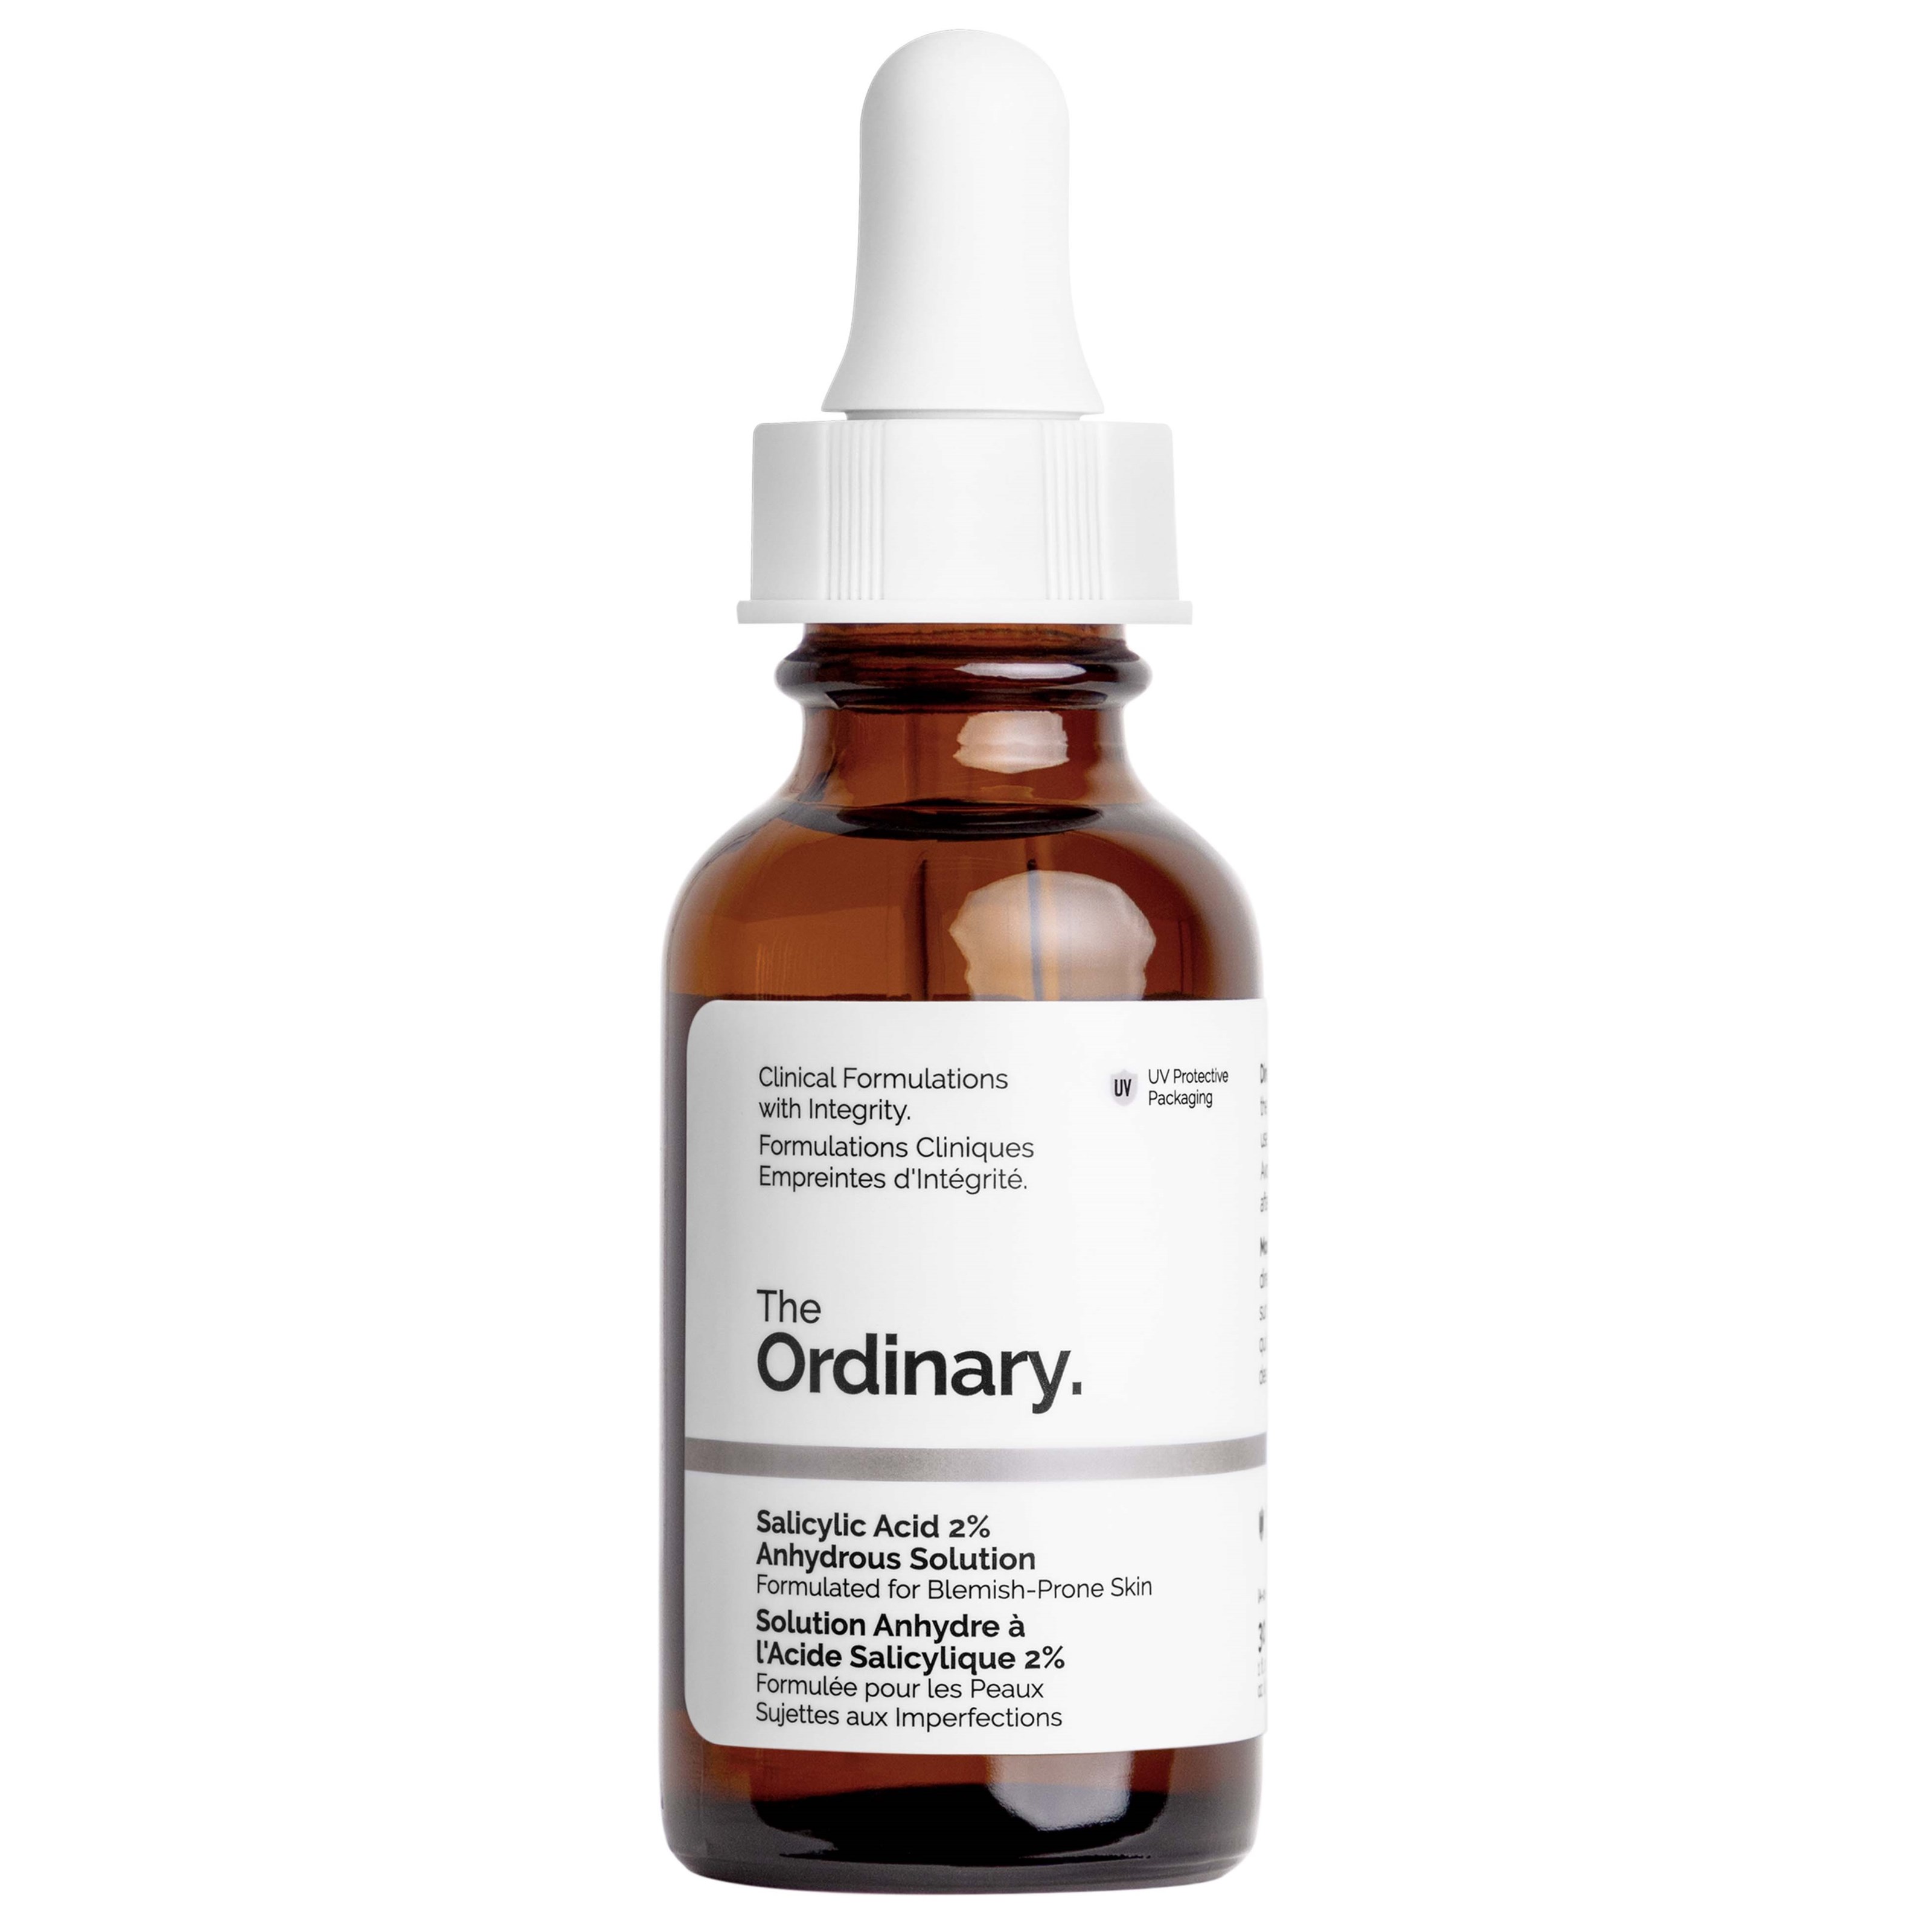 The Ordinary Salicylic Acid 2% Anhydrous Solution, 30 ml